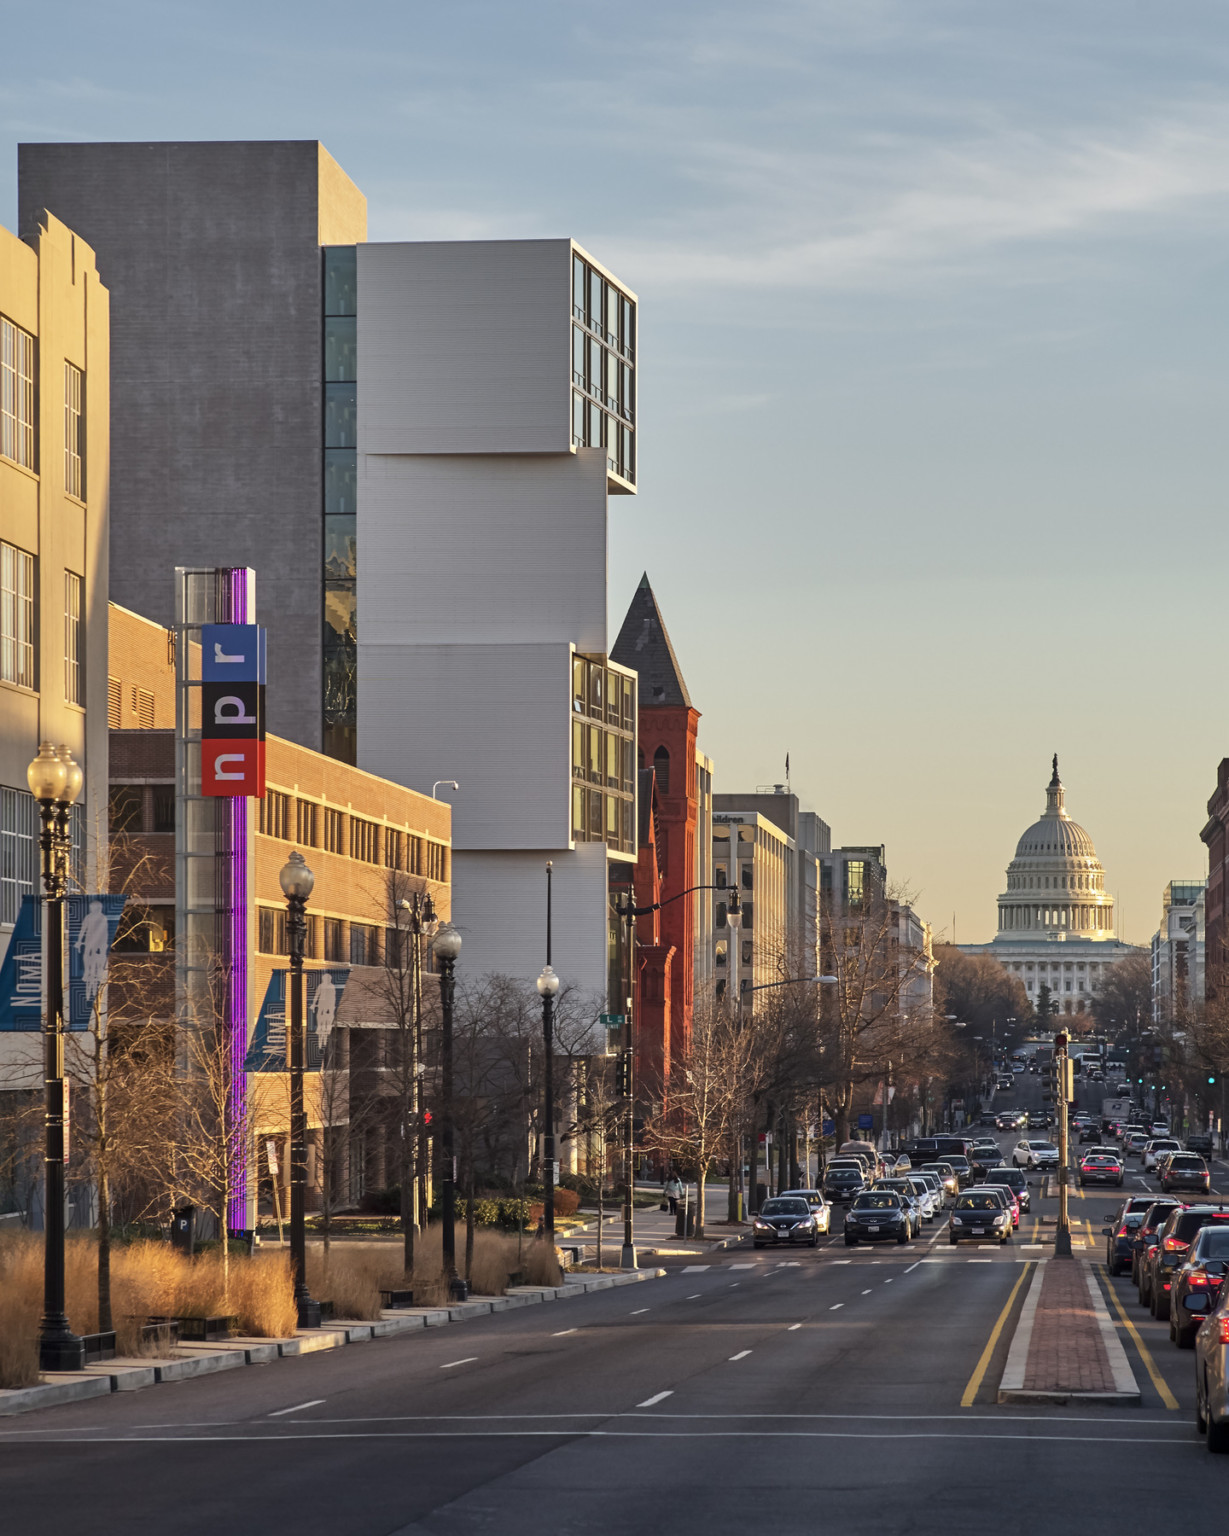 View down capital st to the capital dome full of vehicular and pedestrian traffic in washington dc against a sunset sky